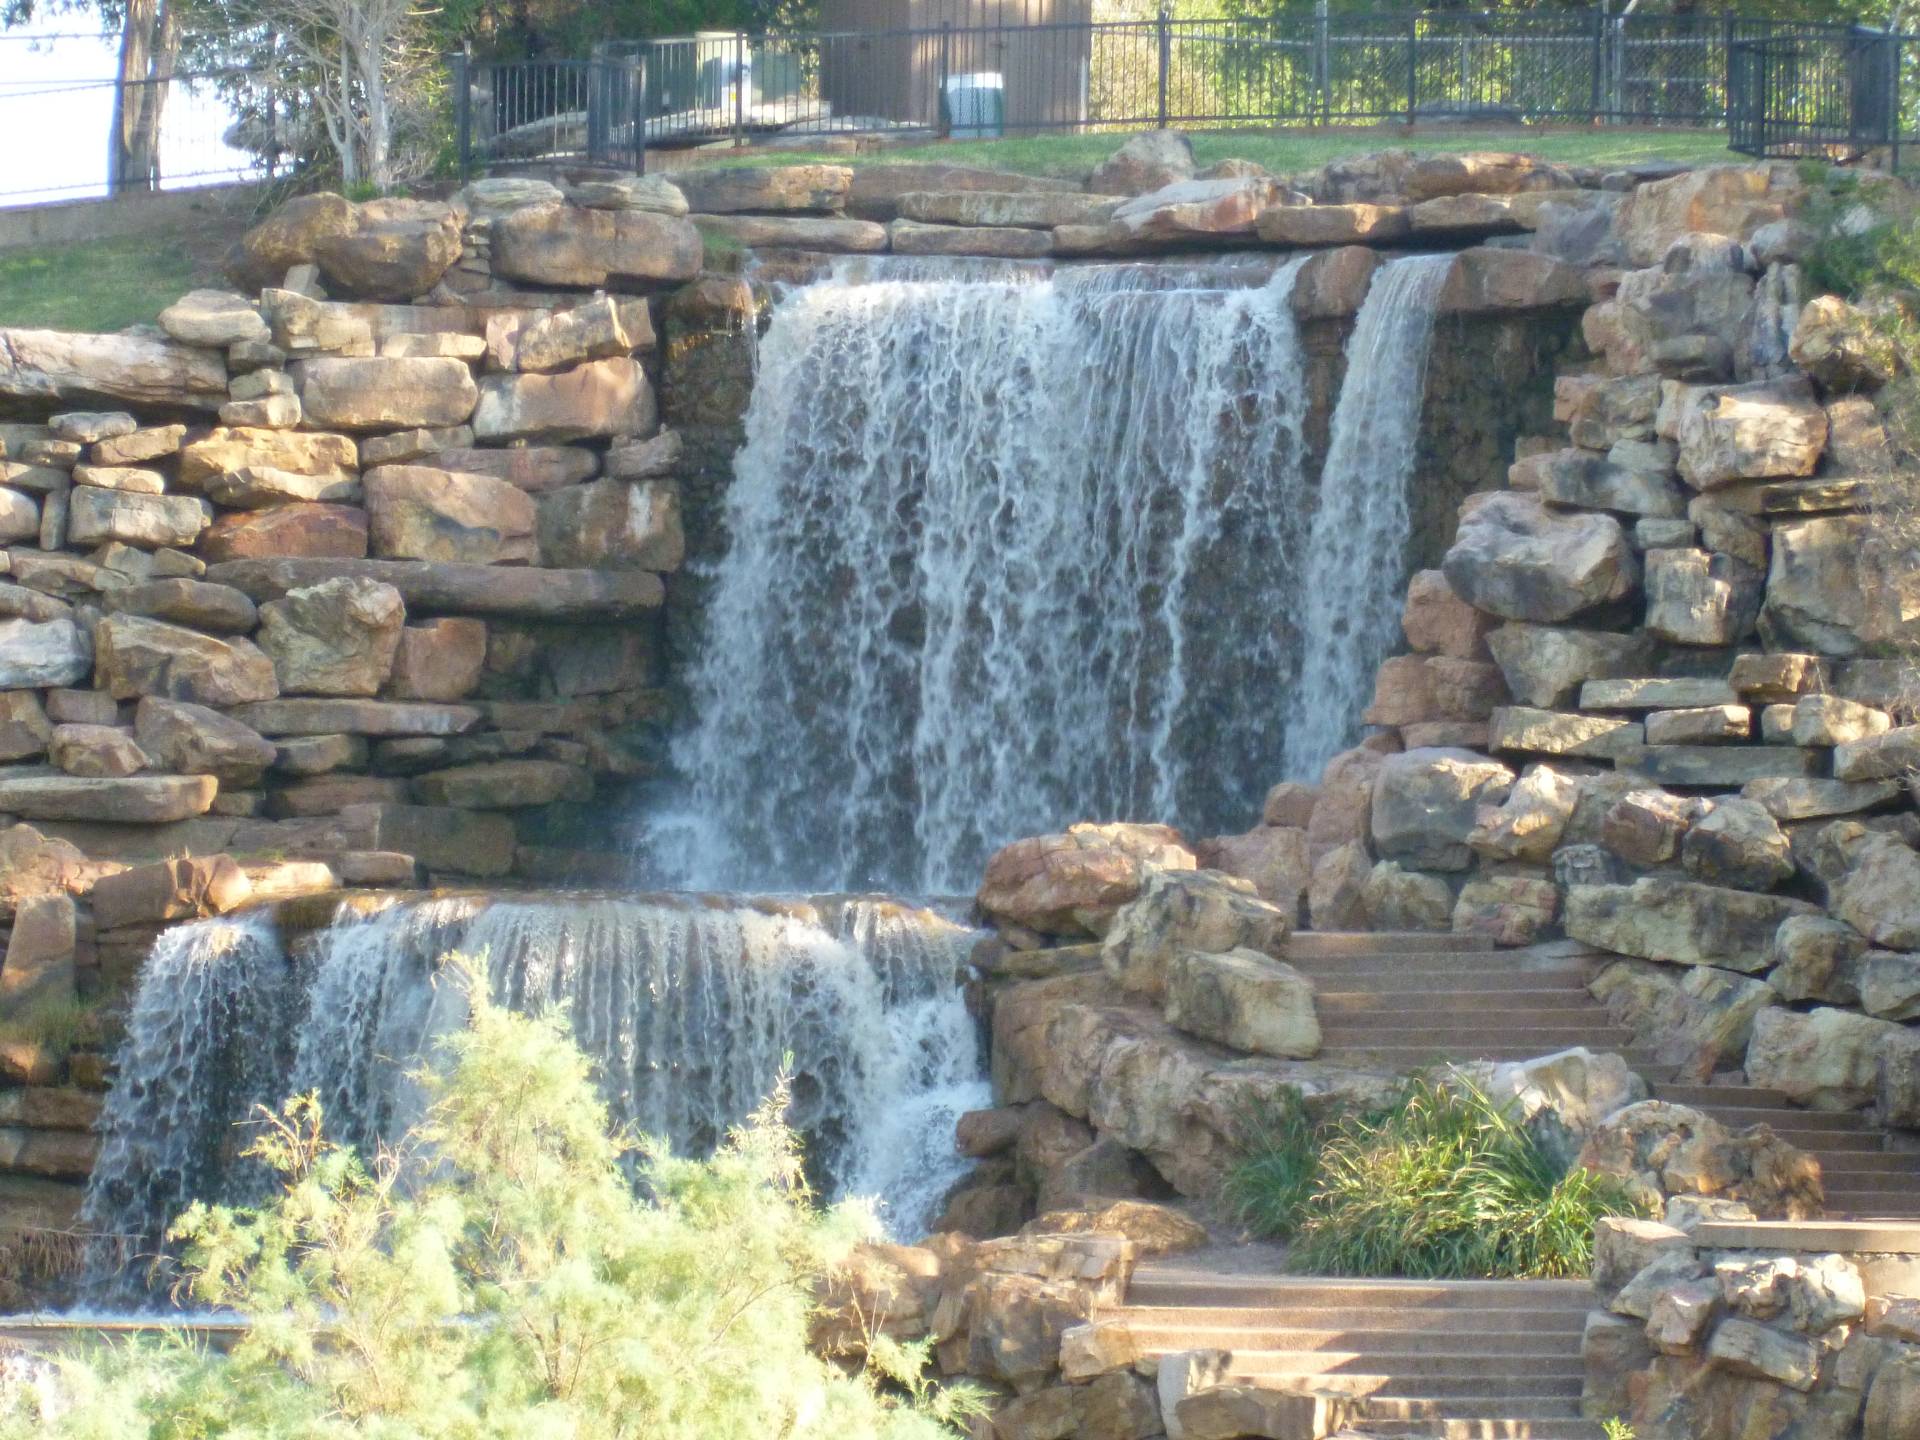 A mesmerizing image showcasing the striking cascades of the Wichita Falls, with water rushing over rugged rocks and framed by native Texan flora, illustrating Wichita Falls' unique connection to its natural landmarks.